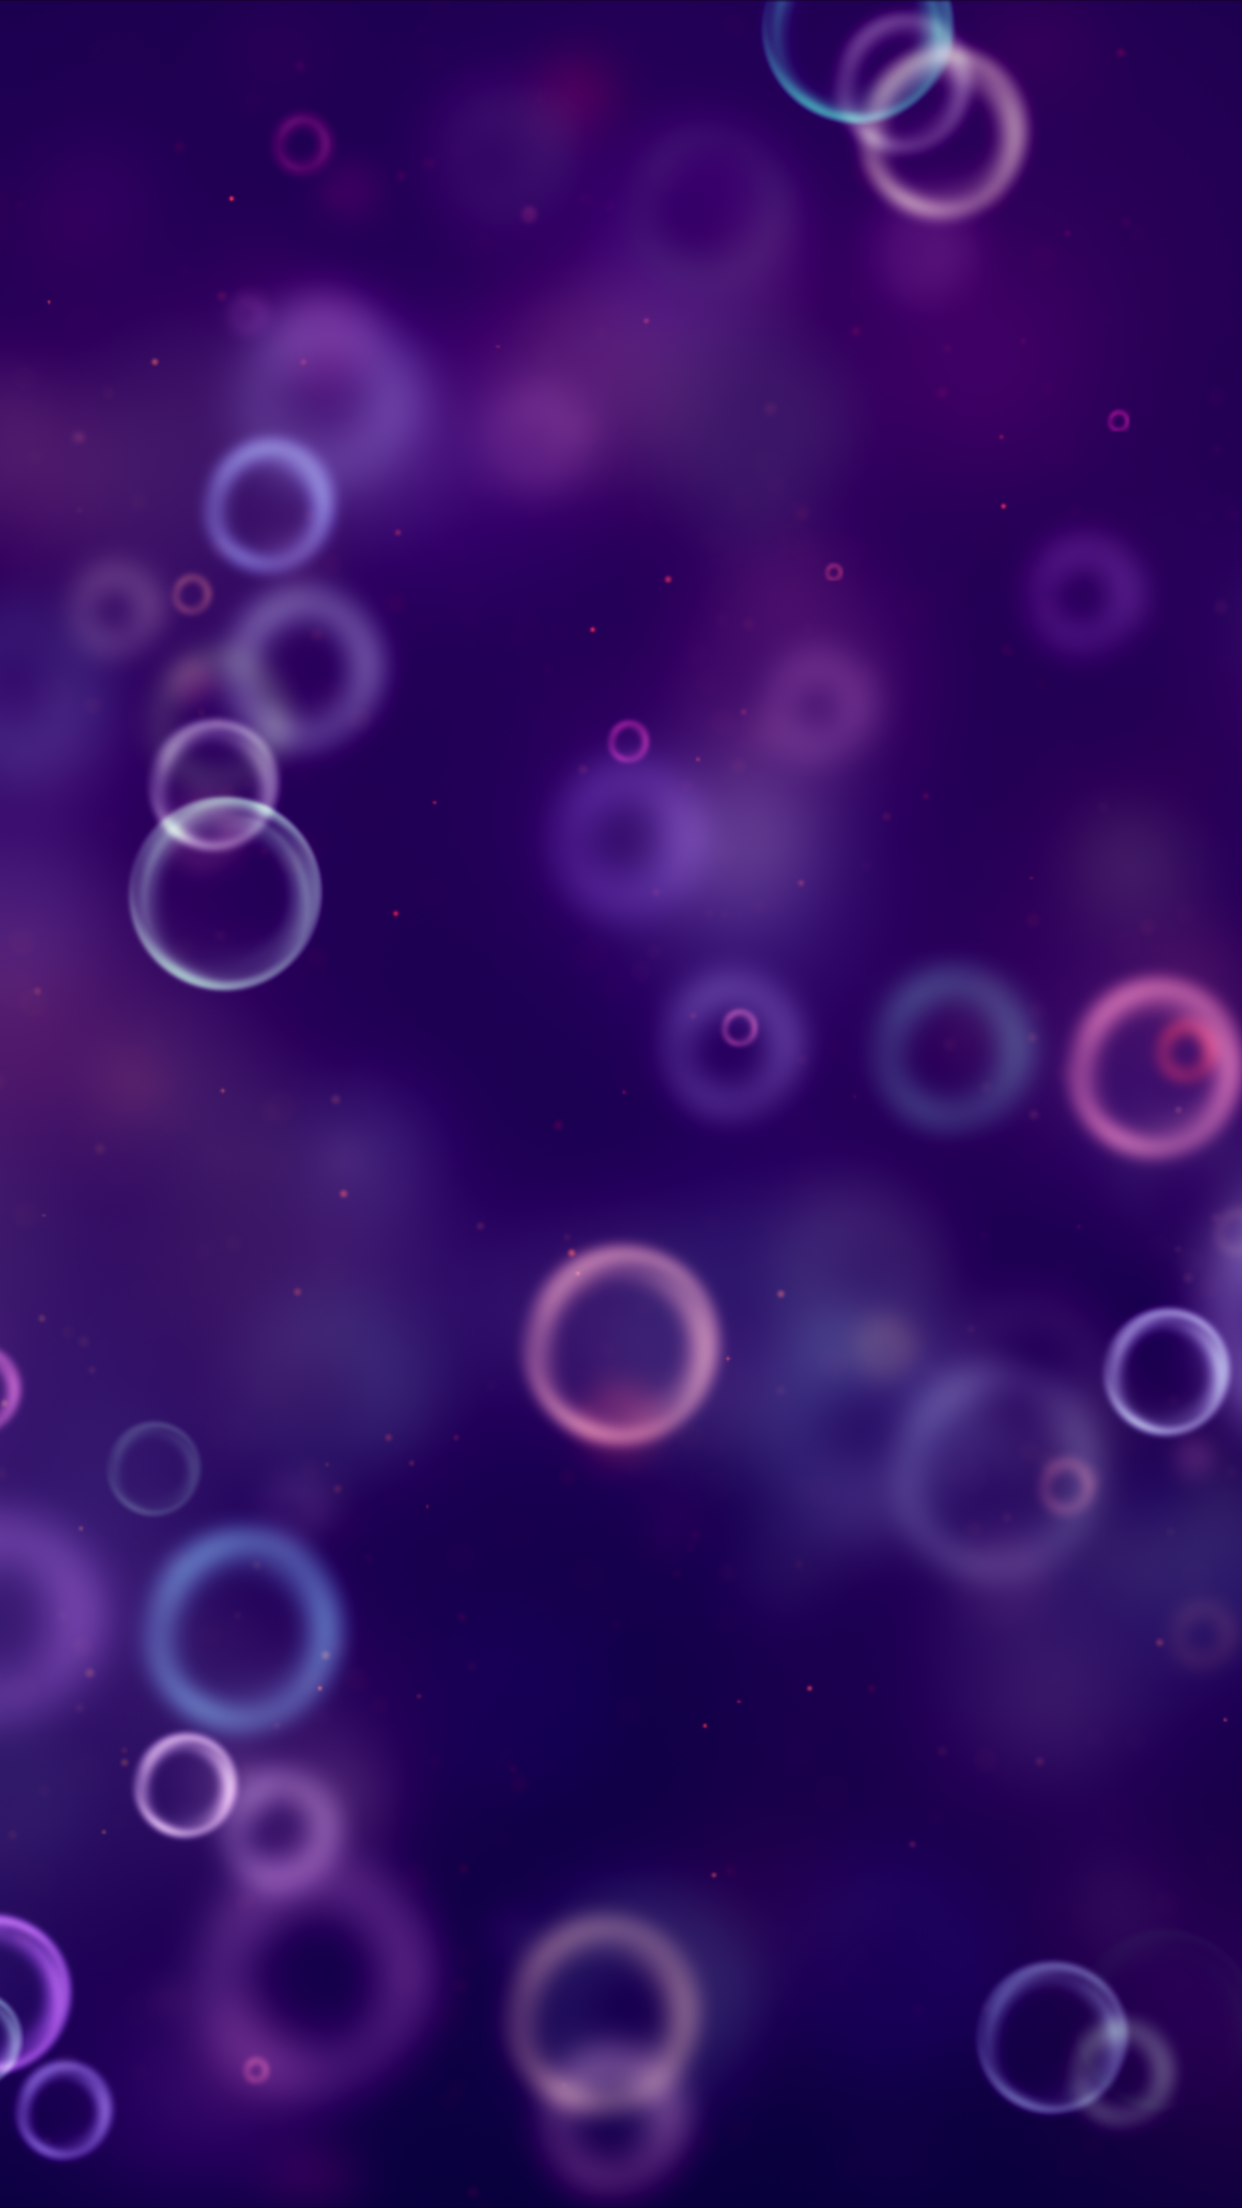 Oil Bubbles IPhone Wallpaper  IPhone Wallpapers  iPhone Wallpapers